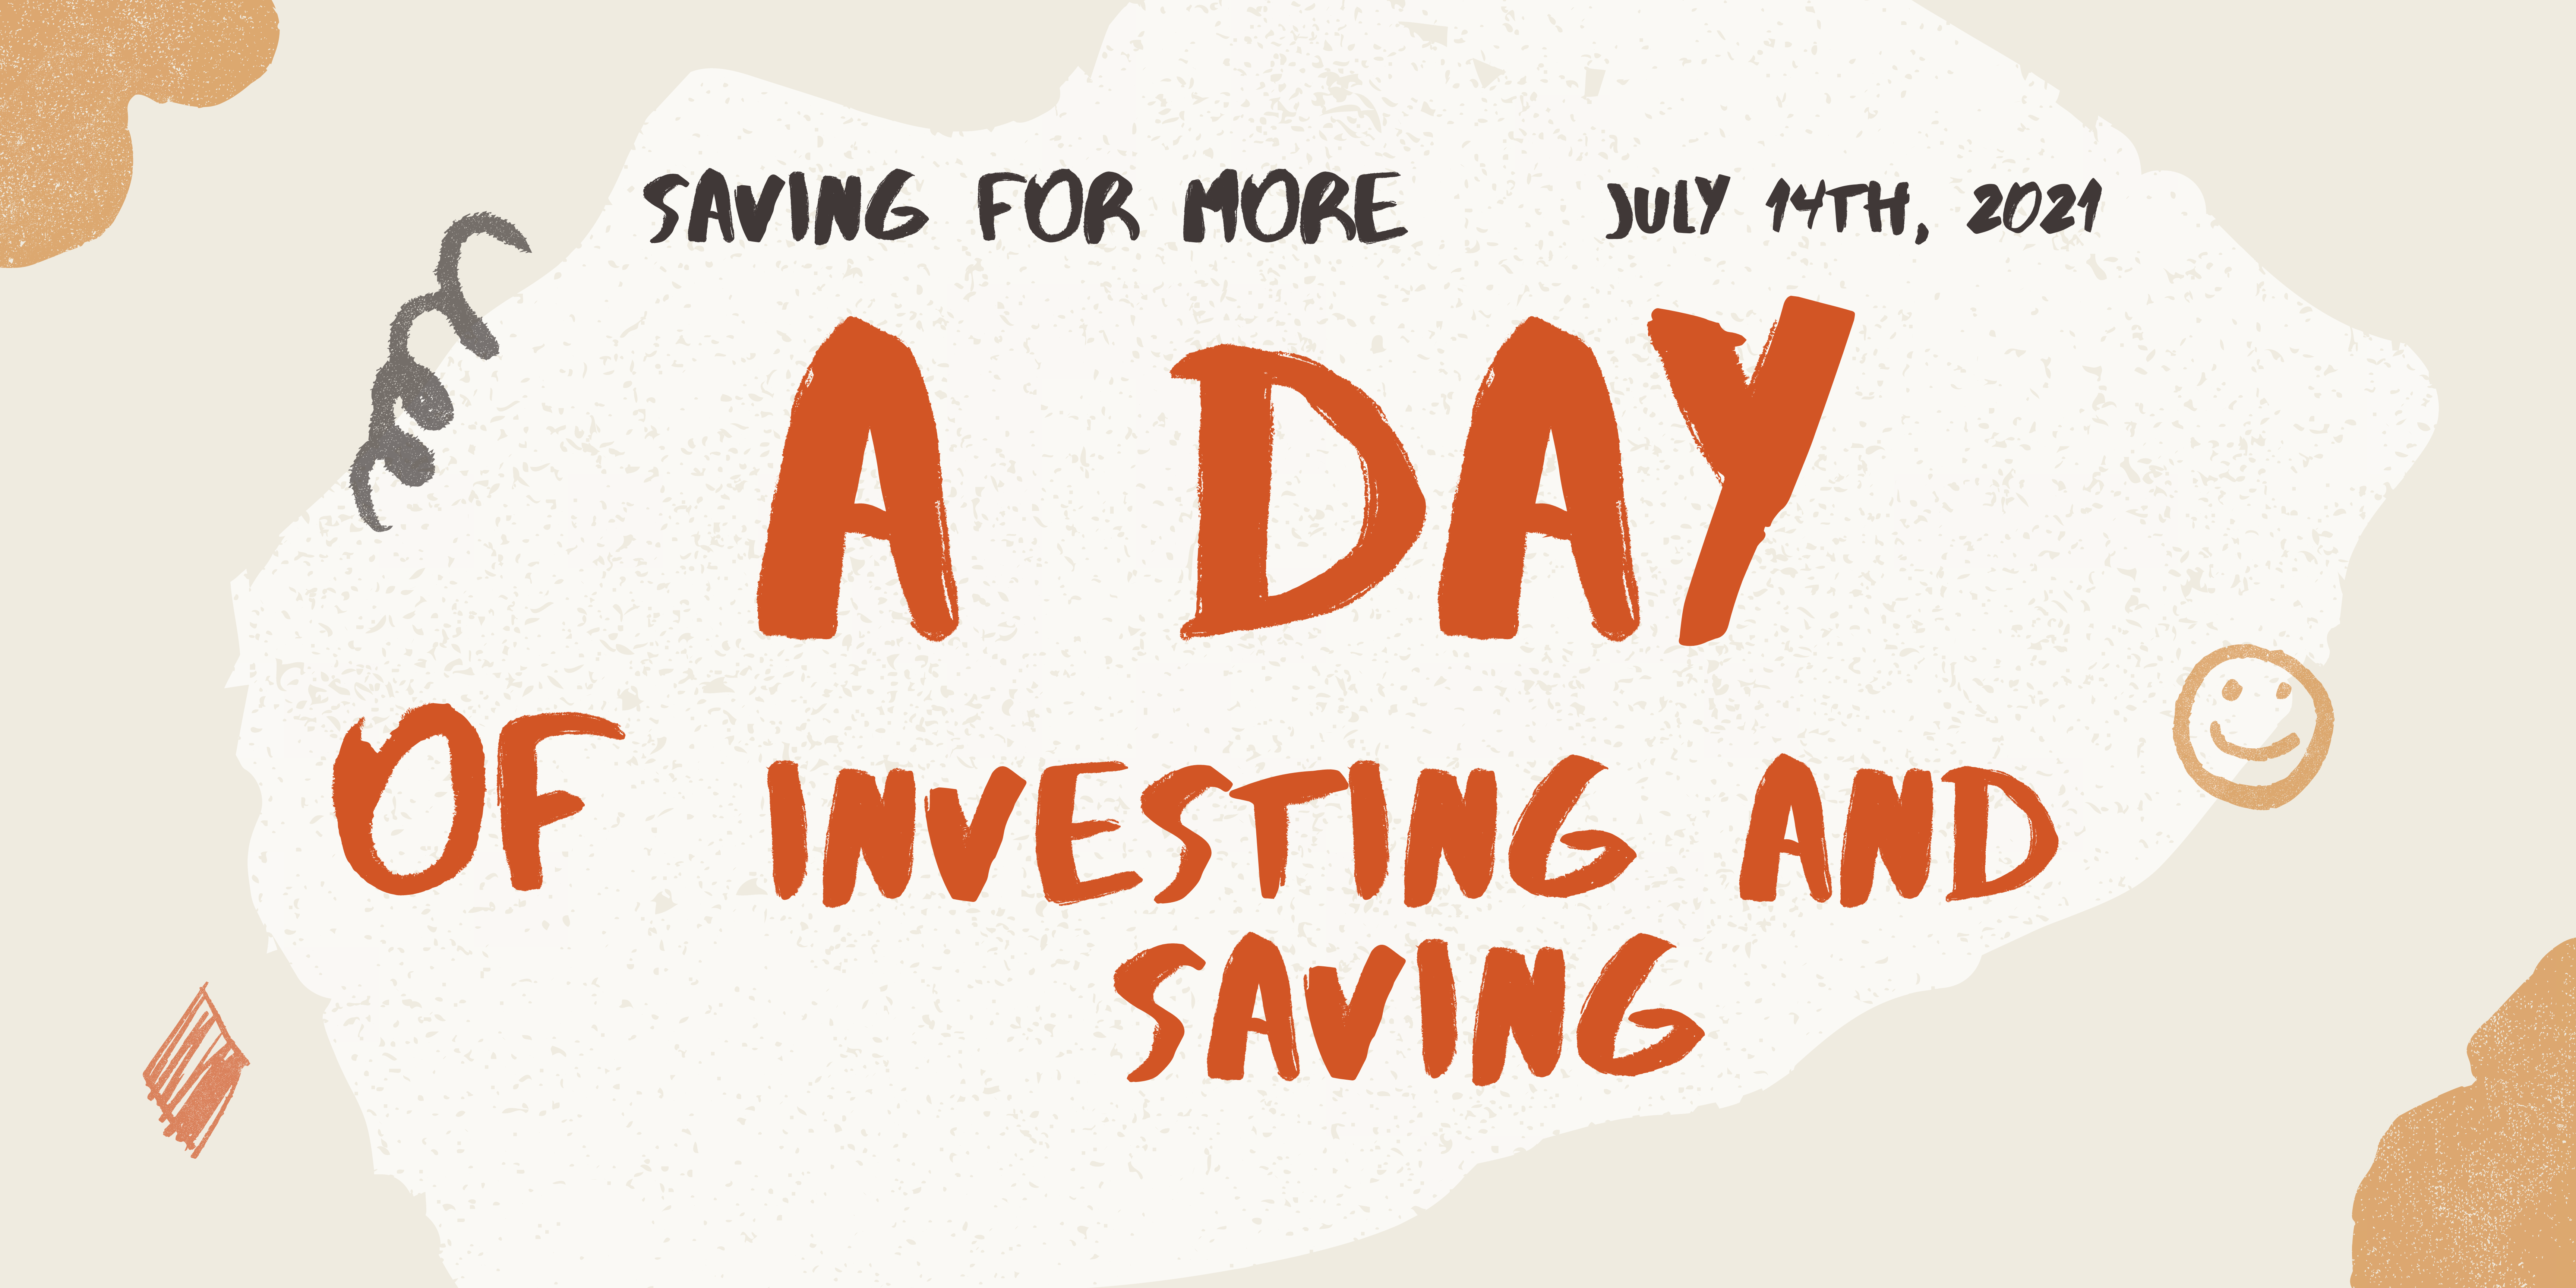 A Day of Investing and Saving